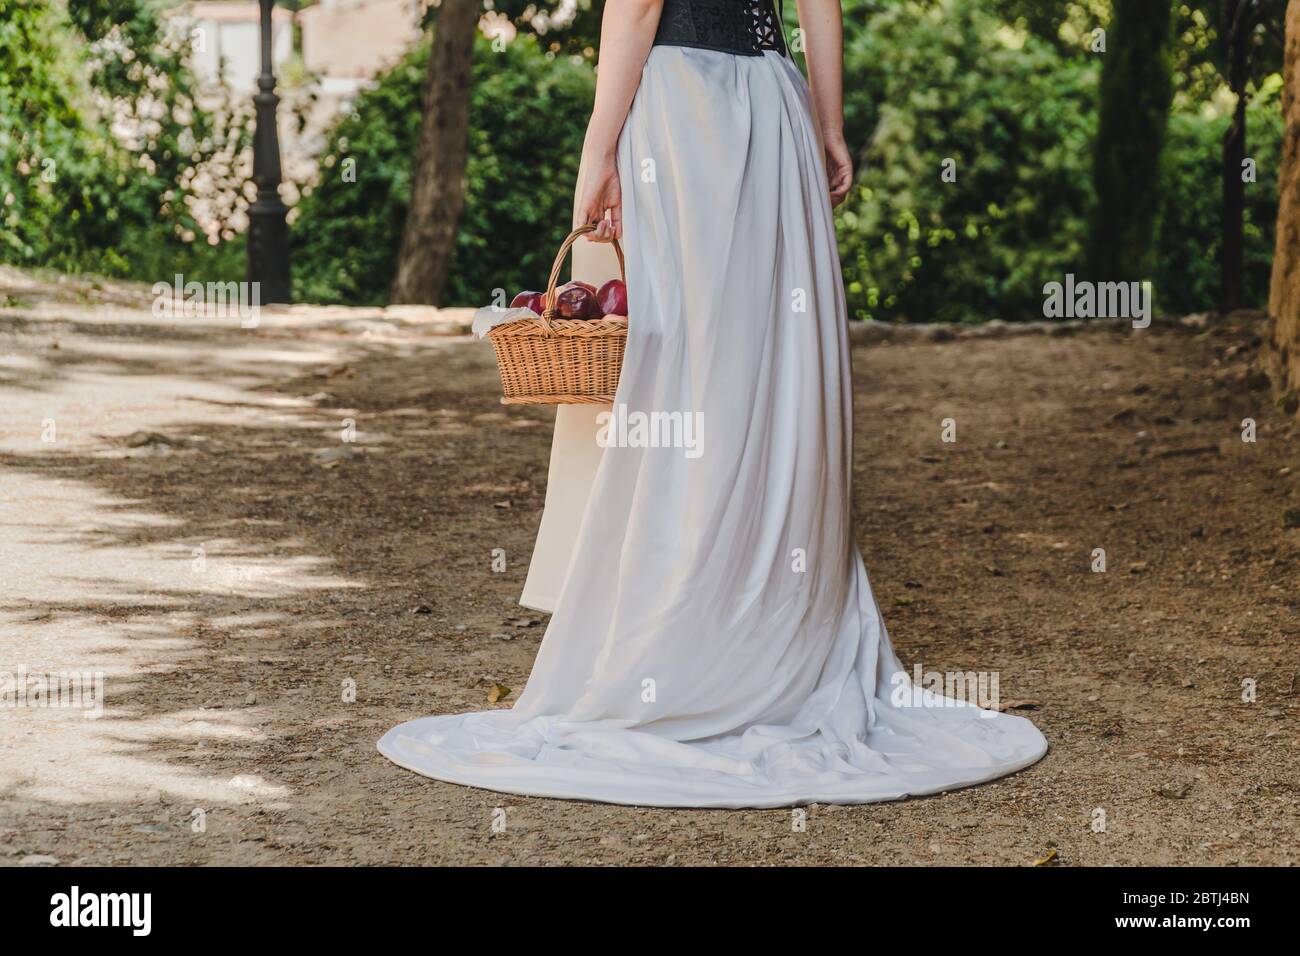 A woman walks with a basket full of red apples. She wears a white dress, seems like from a fairy tale. Stock Photo